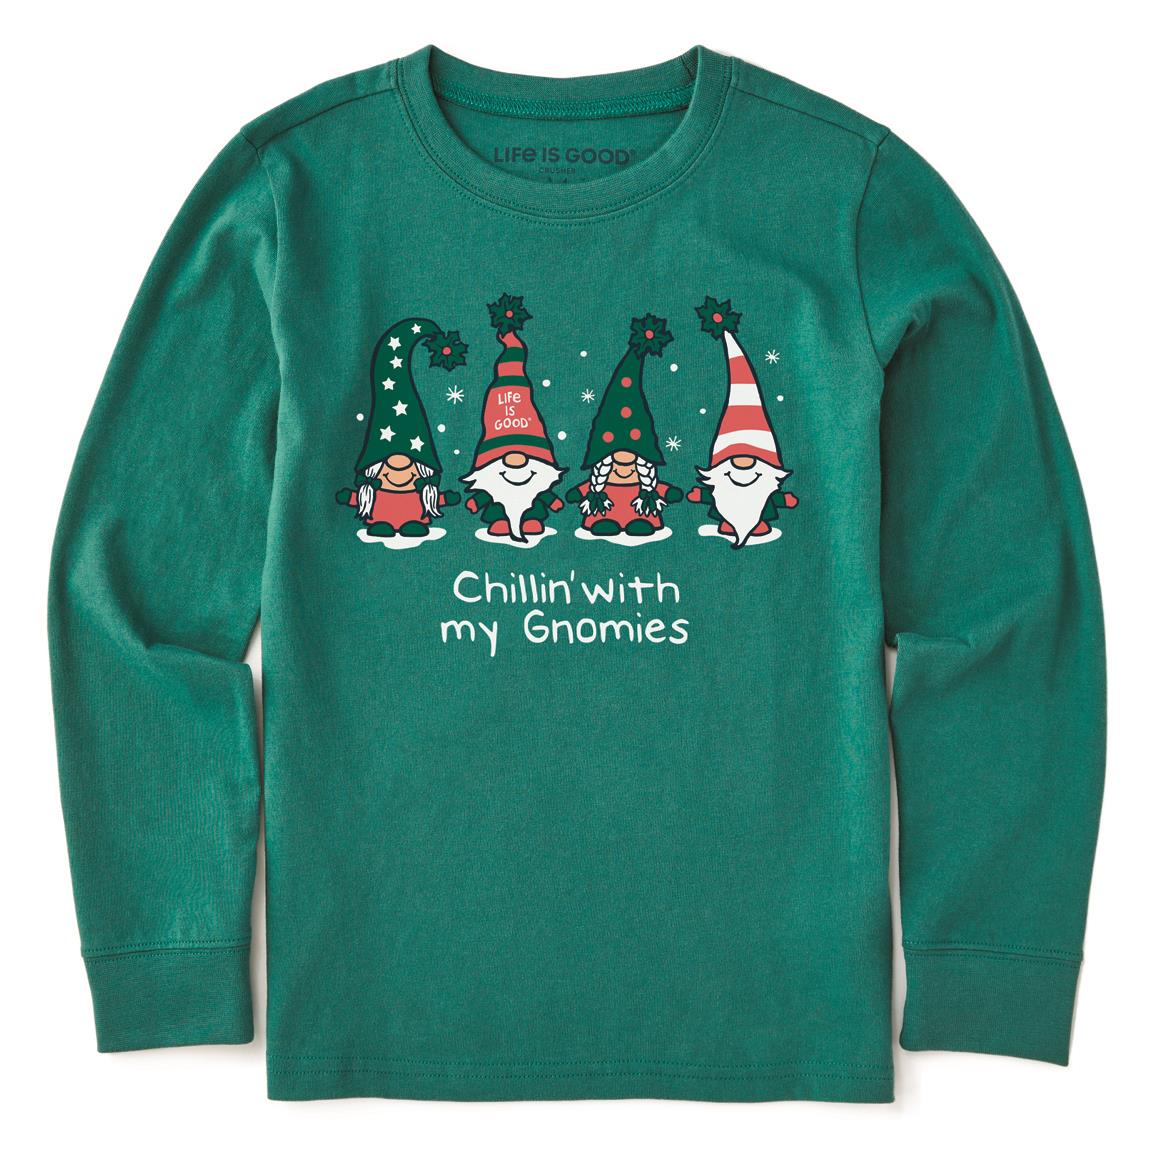 Life Is Good Kids' Chillin' With My Gnomes Family Crusher Shirt, Spruce Green